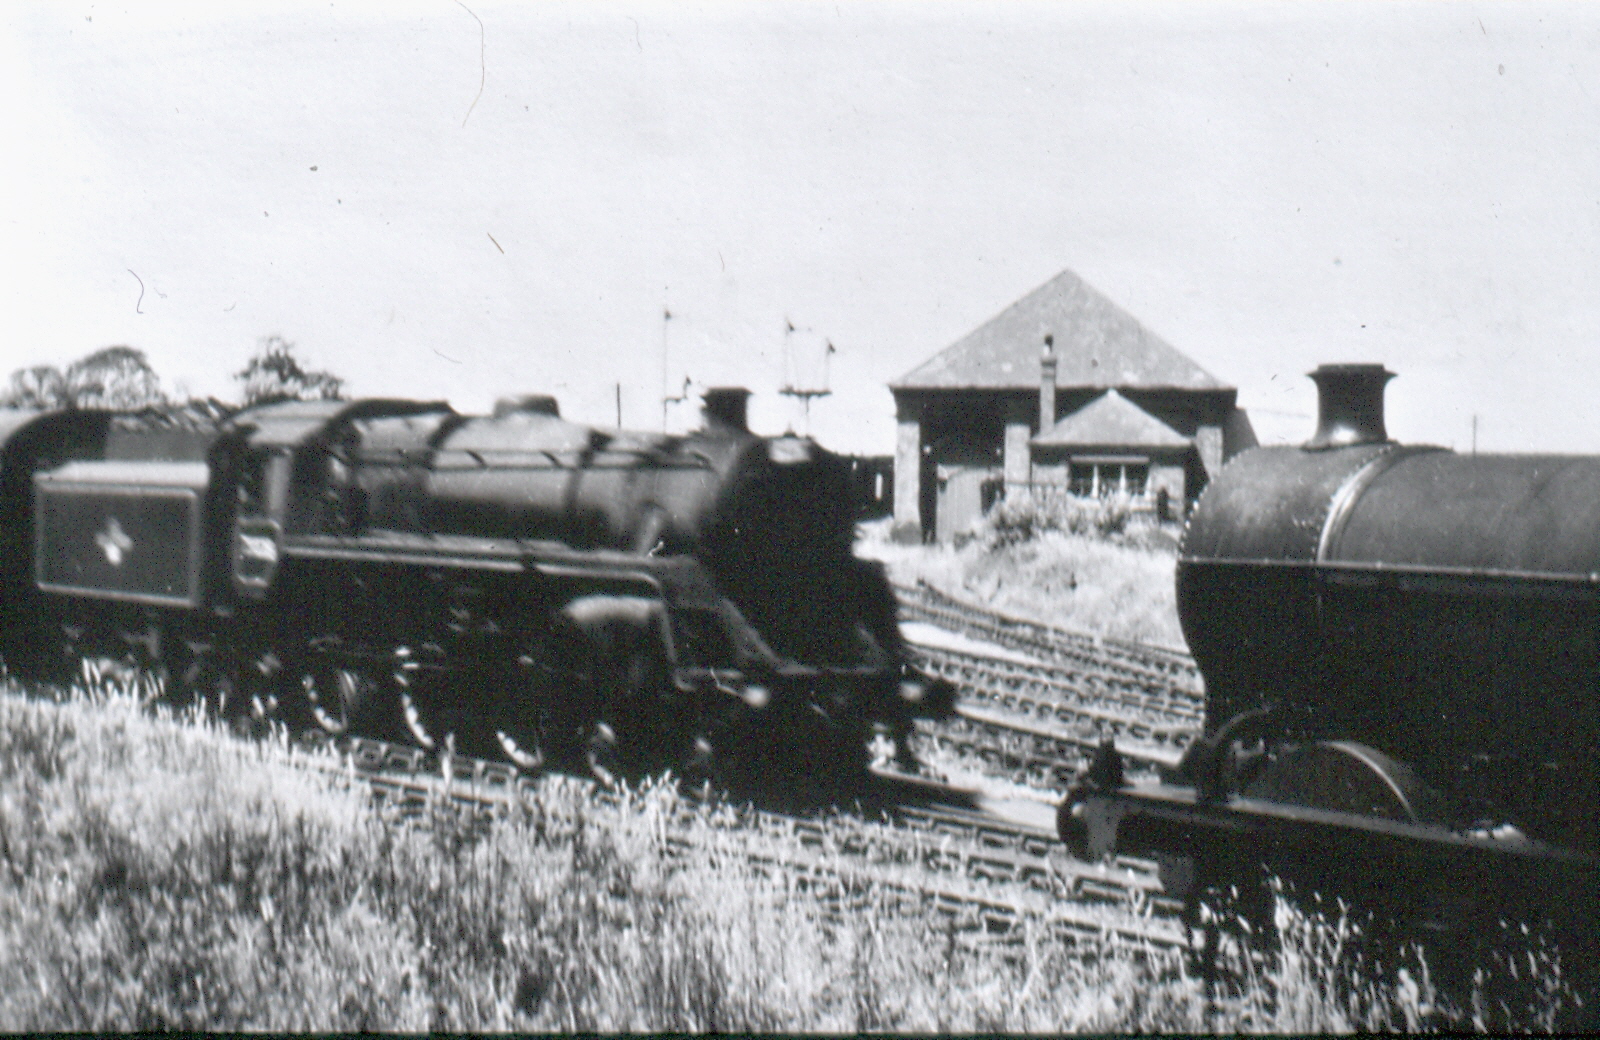 Start of the branch line seen between two engines.